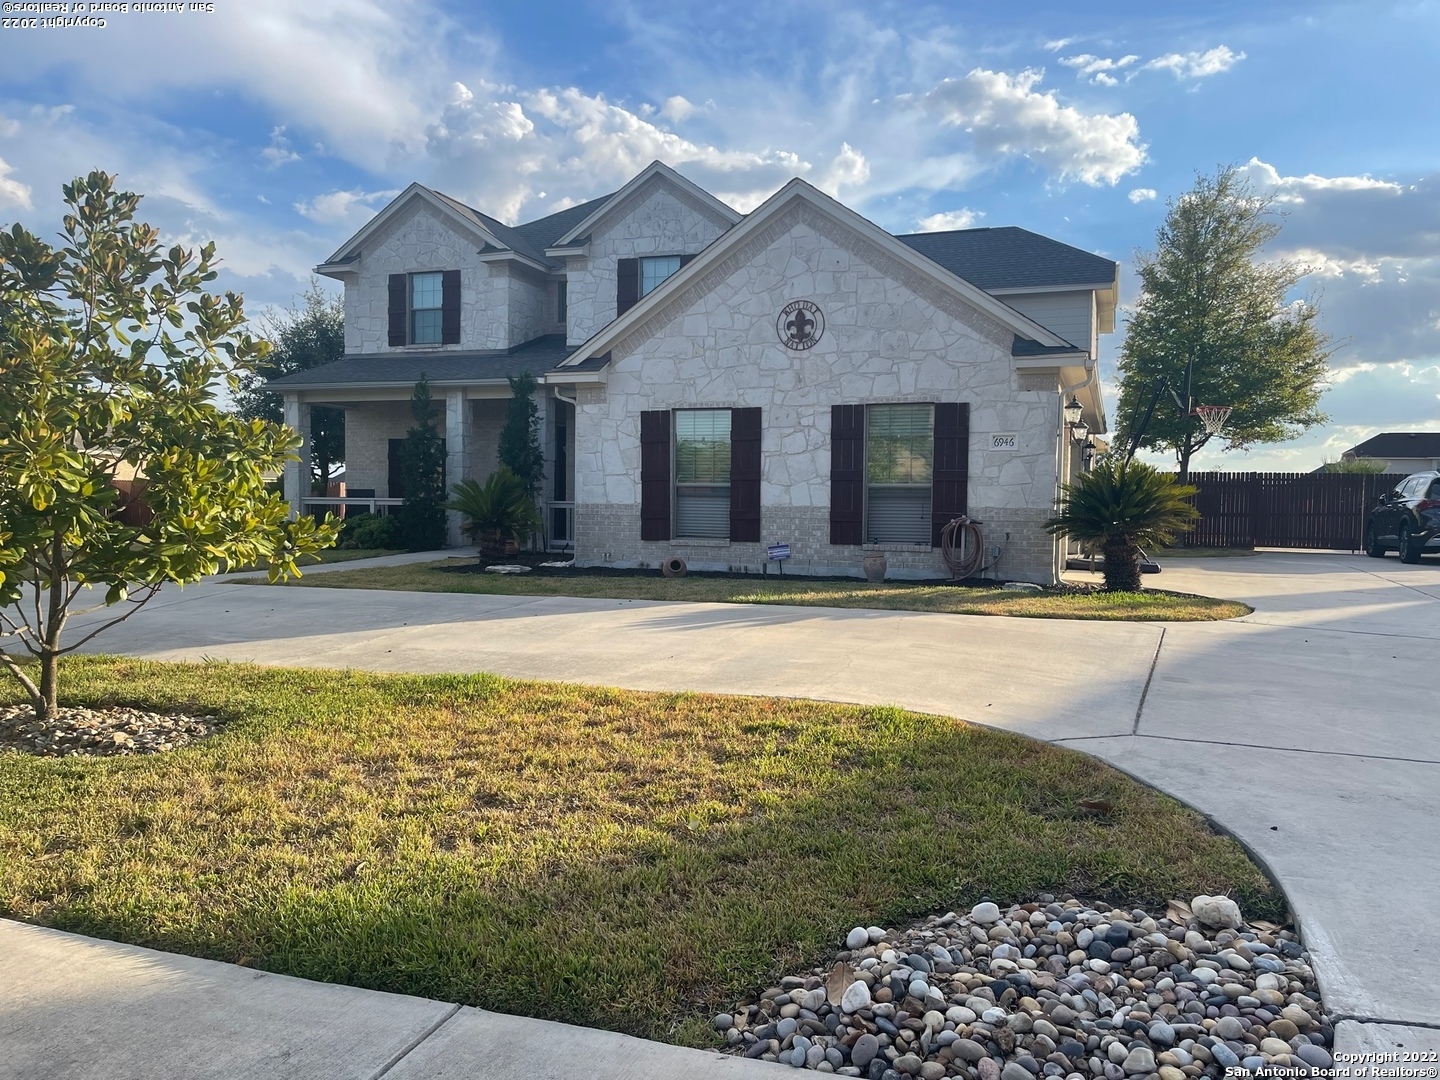 BEAUTIFUL 5 BEDROOM/4 BATHROOM HOME ON A HALF ACRE HOMESITE  THIS HOME WILL NOT LAST LONG. COME OUT AND SEE IT TODAY.   SELECTED UPSTAIRS FURNITURE WILL BE INCLUDED IN THE SALE OF THE HOME.